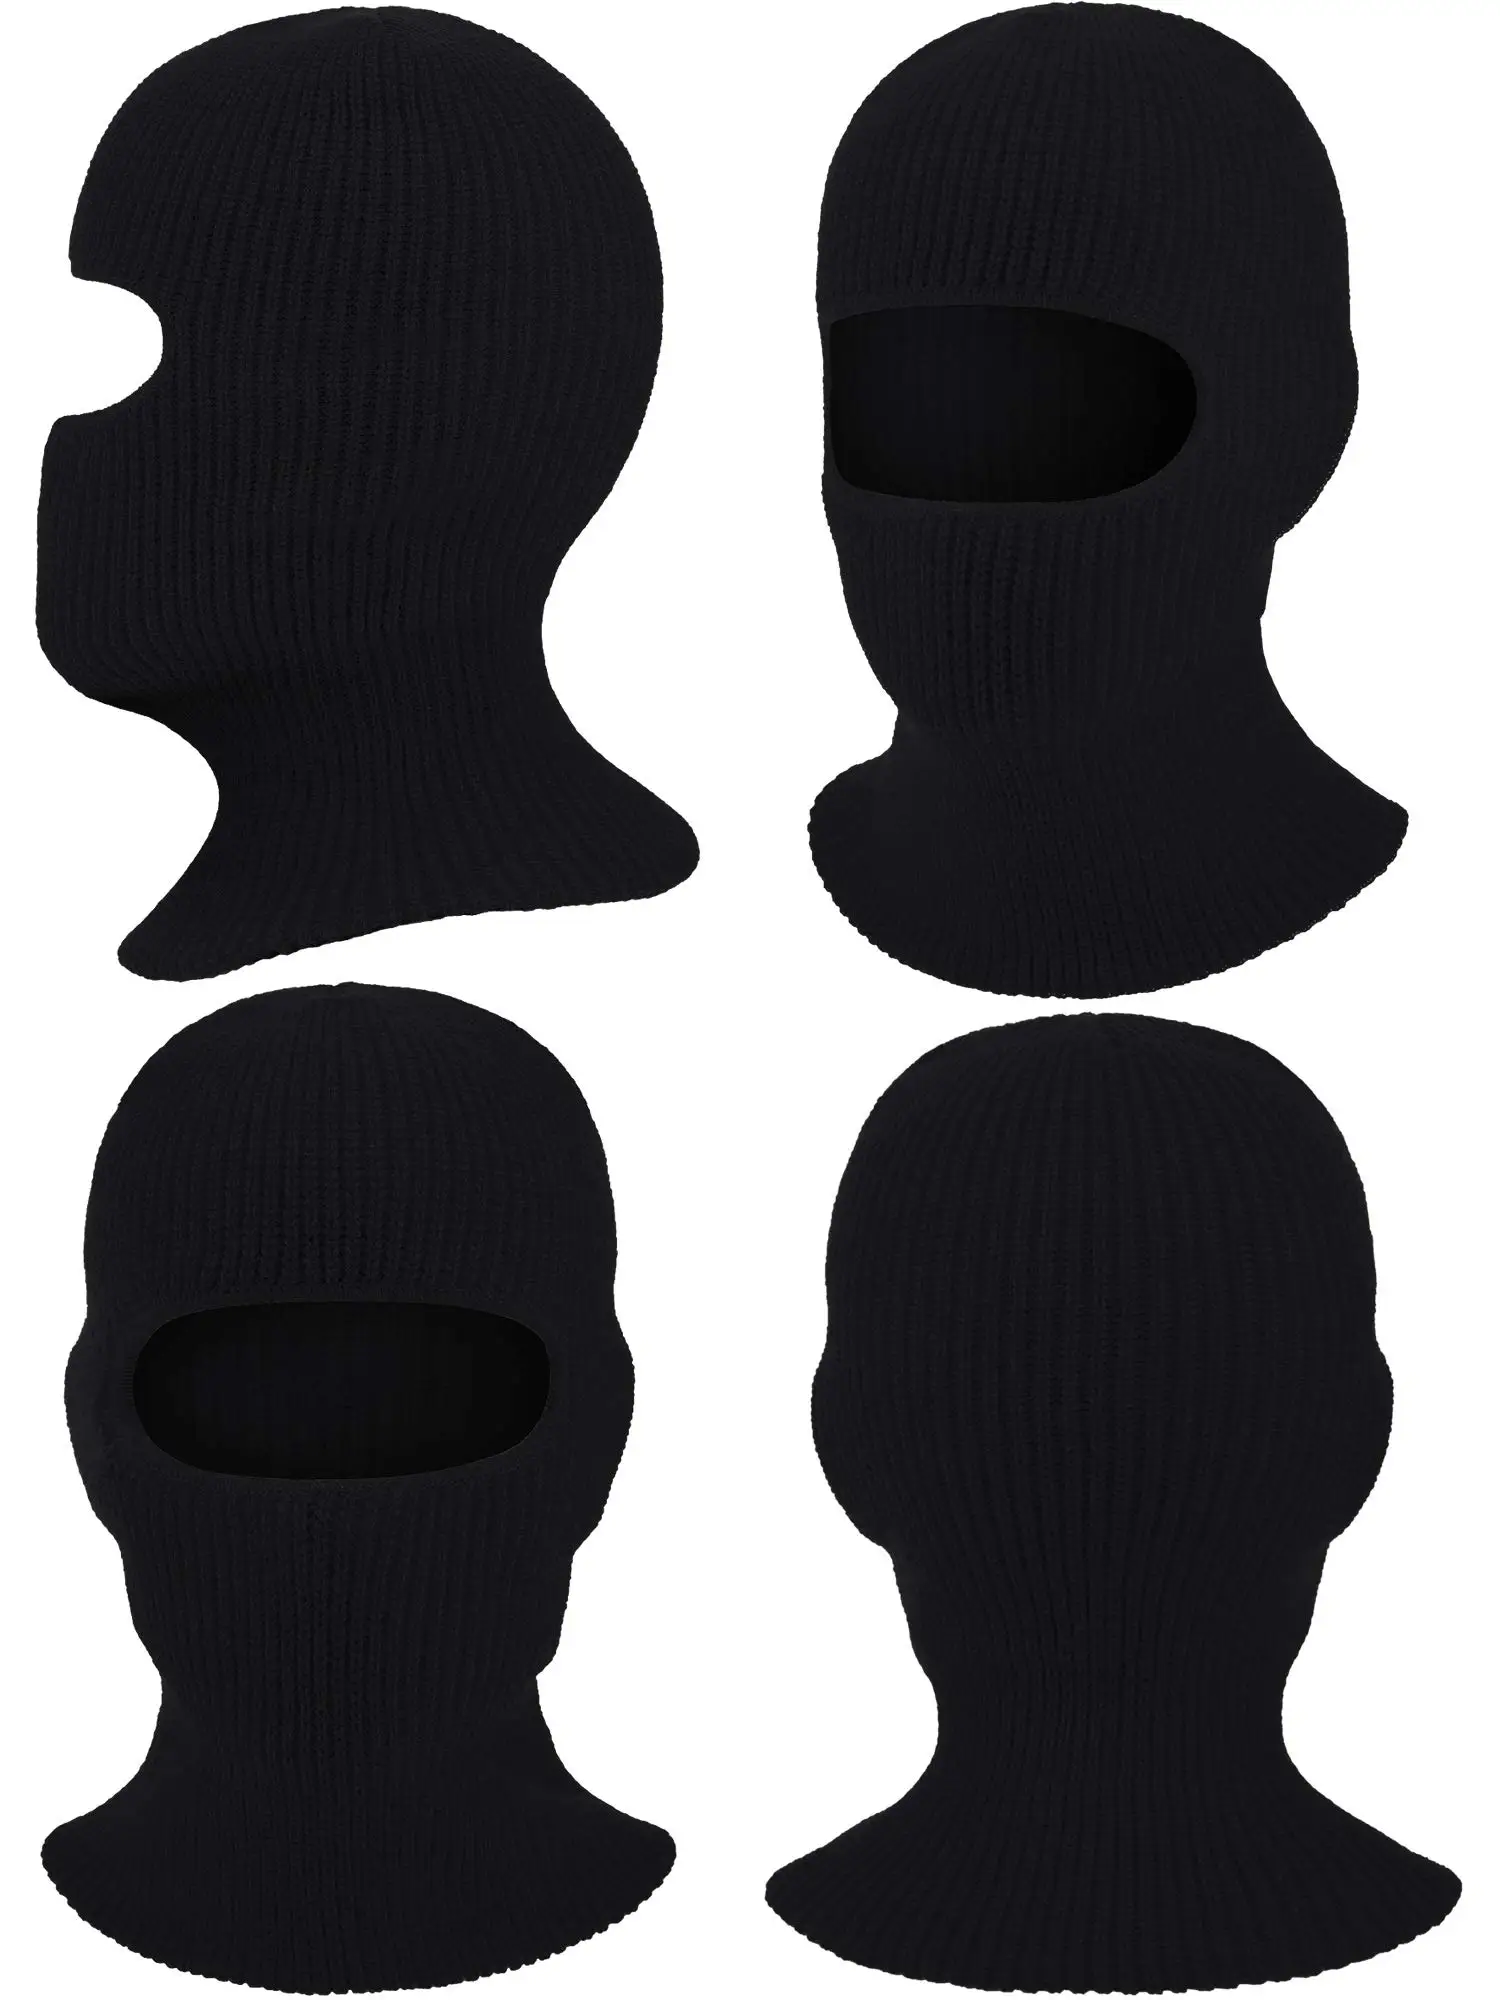 1-Hole Ski Mask Knitted Hat Face Cover Winter Warm Balaclava Bonnet Outdoor Sports Beanies Funny Party Riding Cap winter cap for men